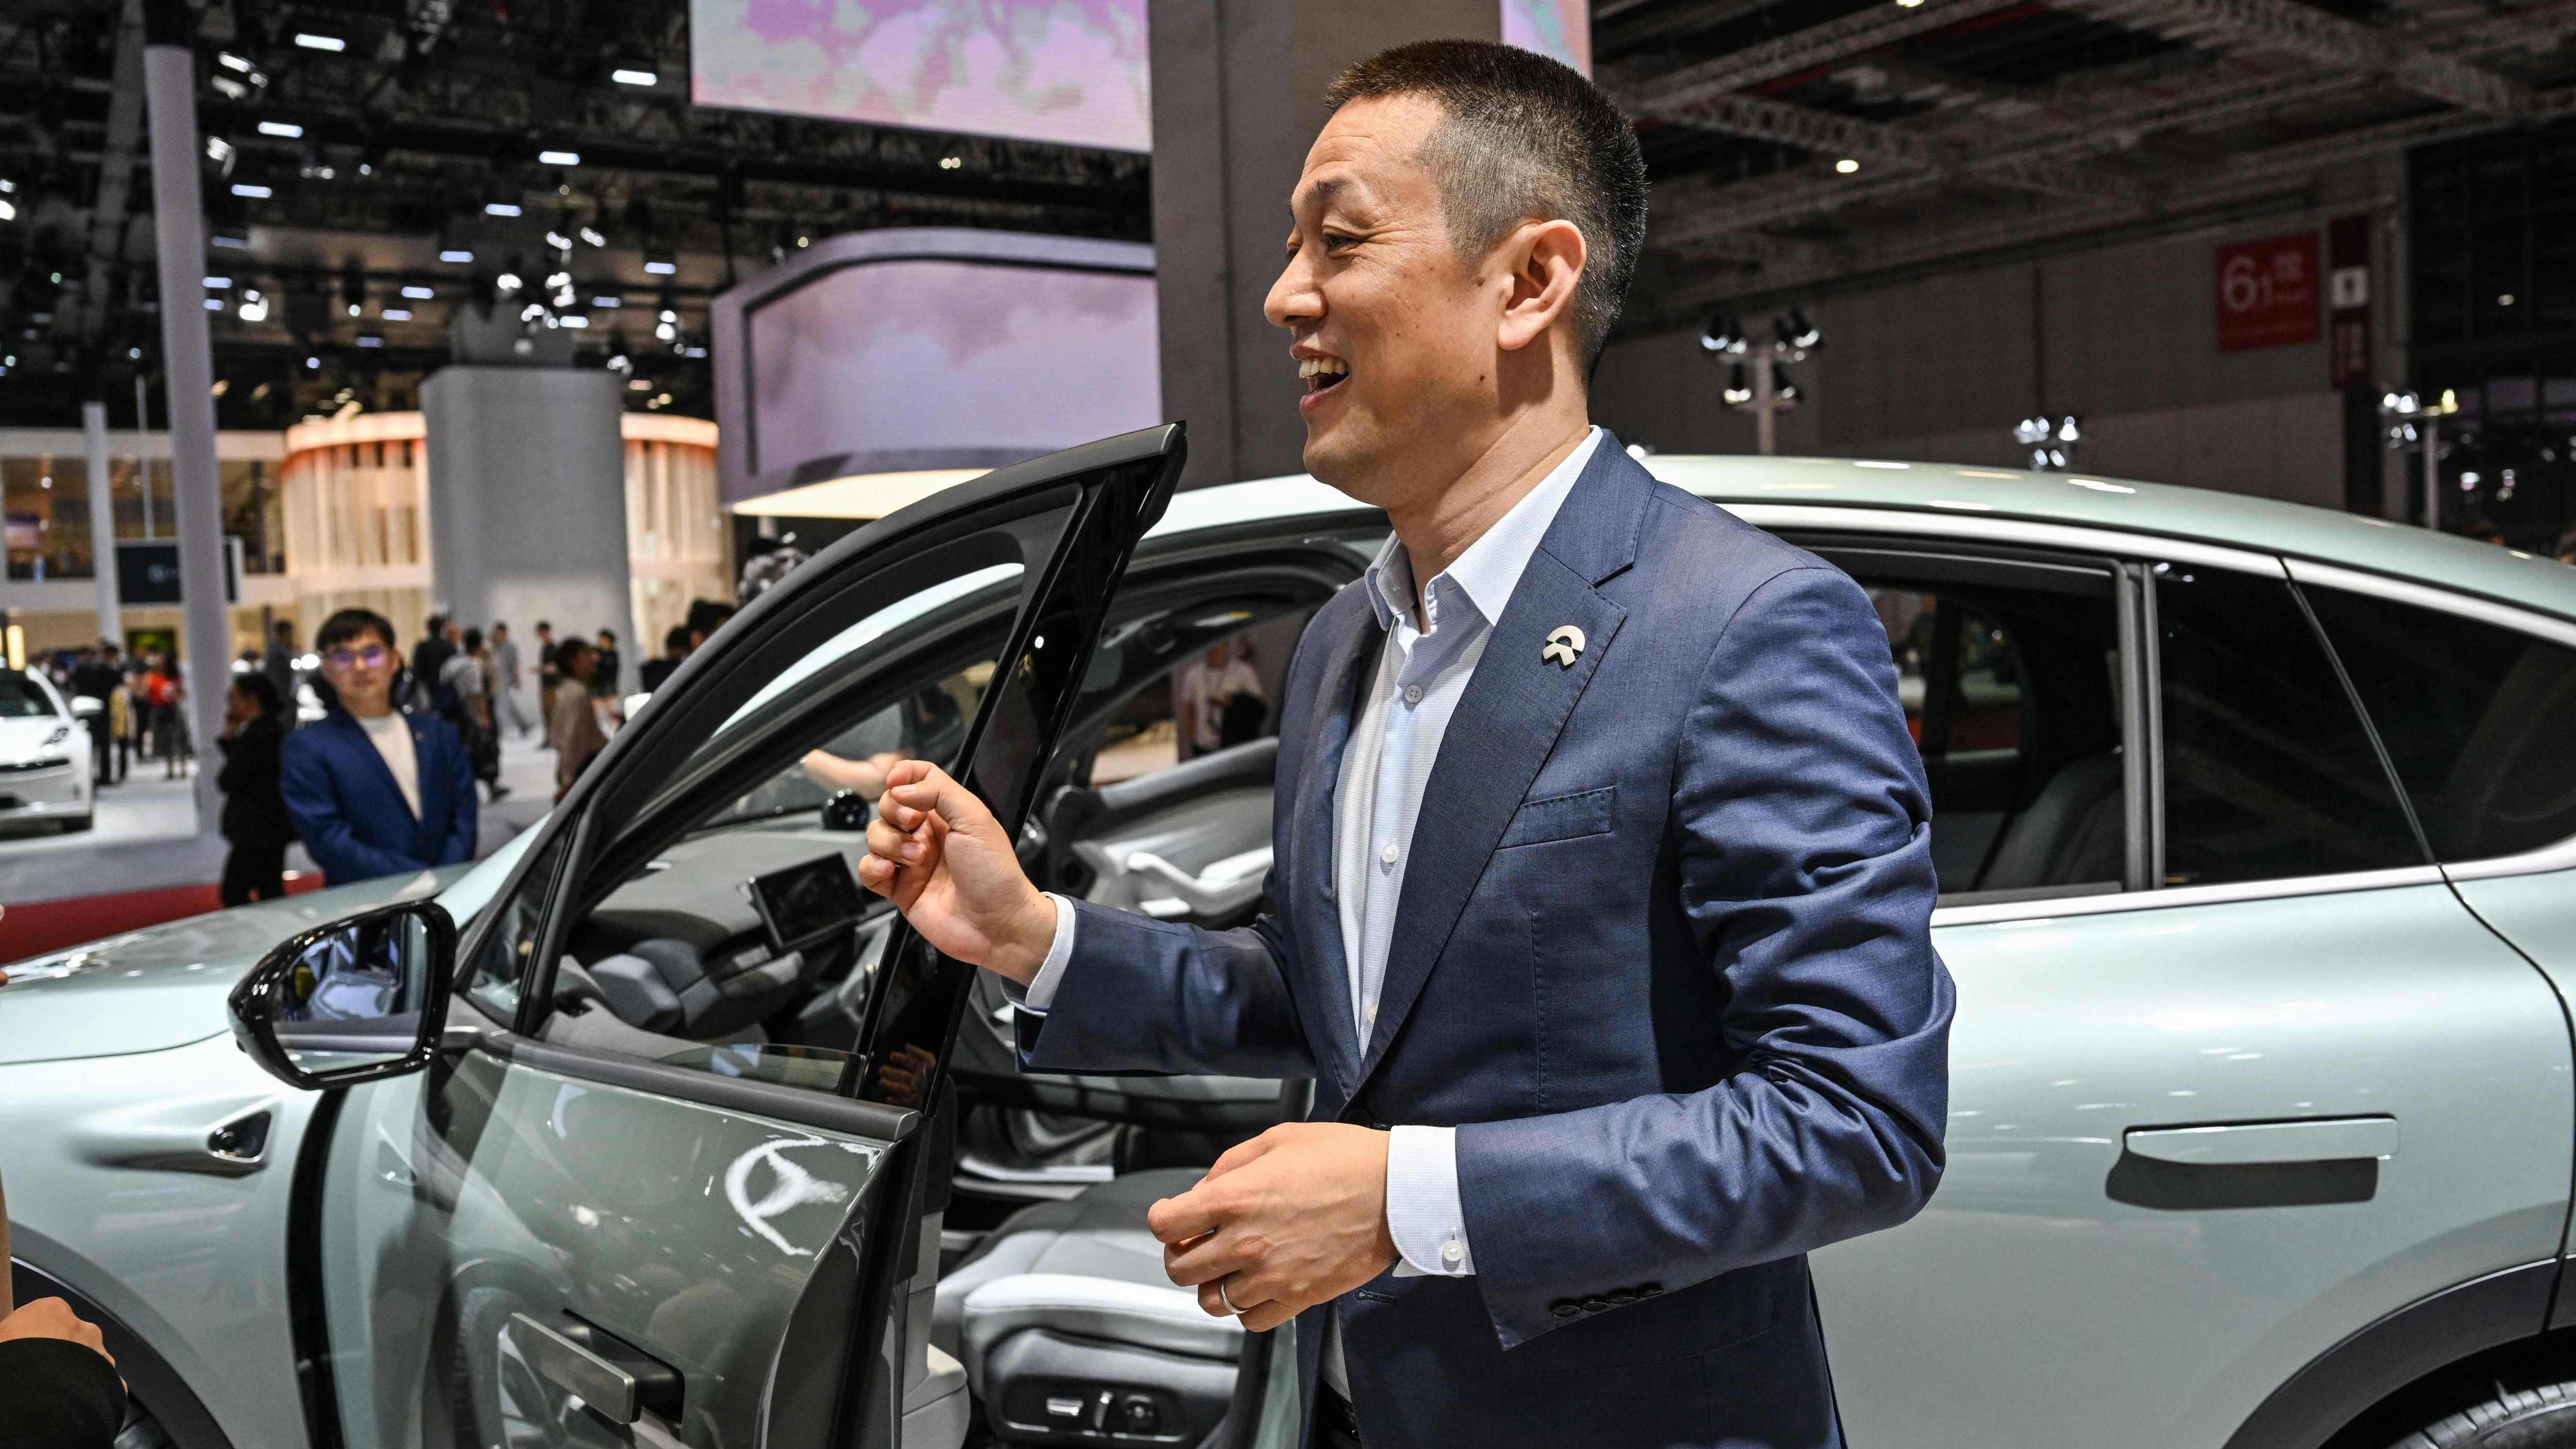 William Li, the chief executive of Nio, says there is “no interest” in petrol vehicles any more